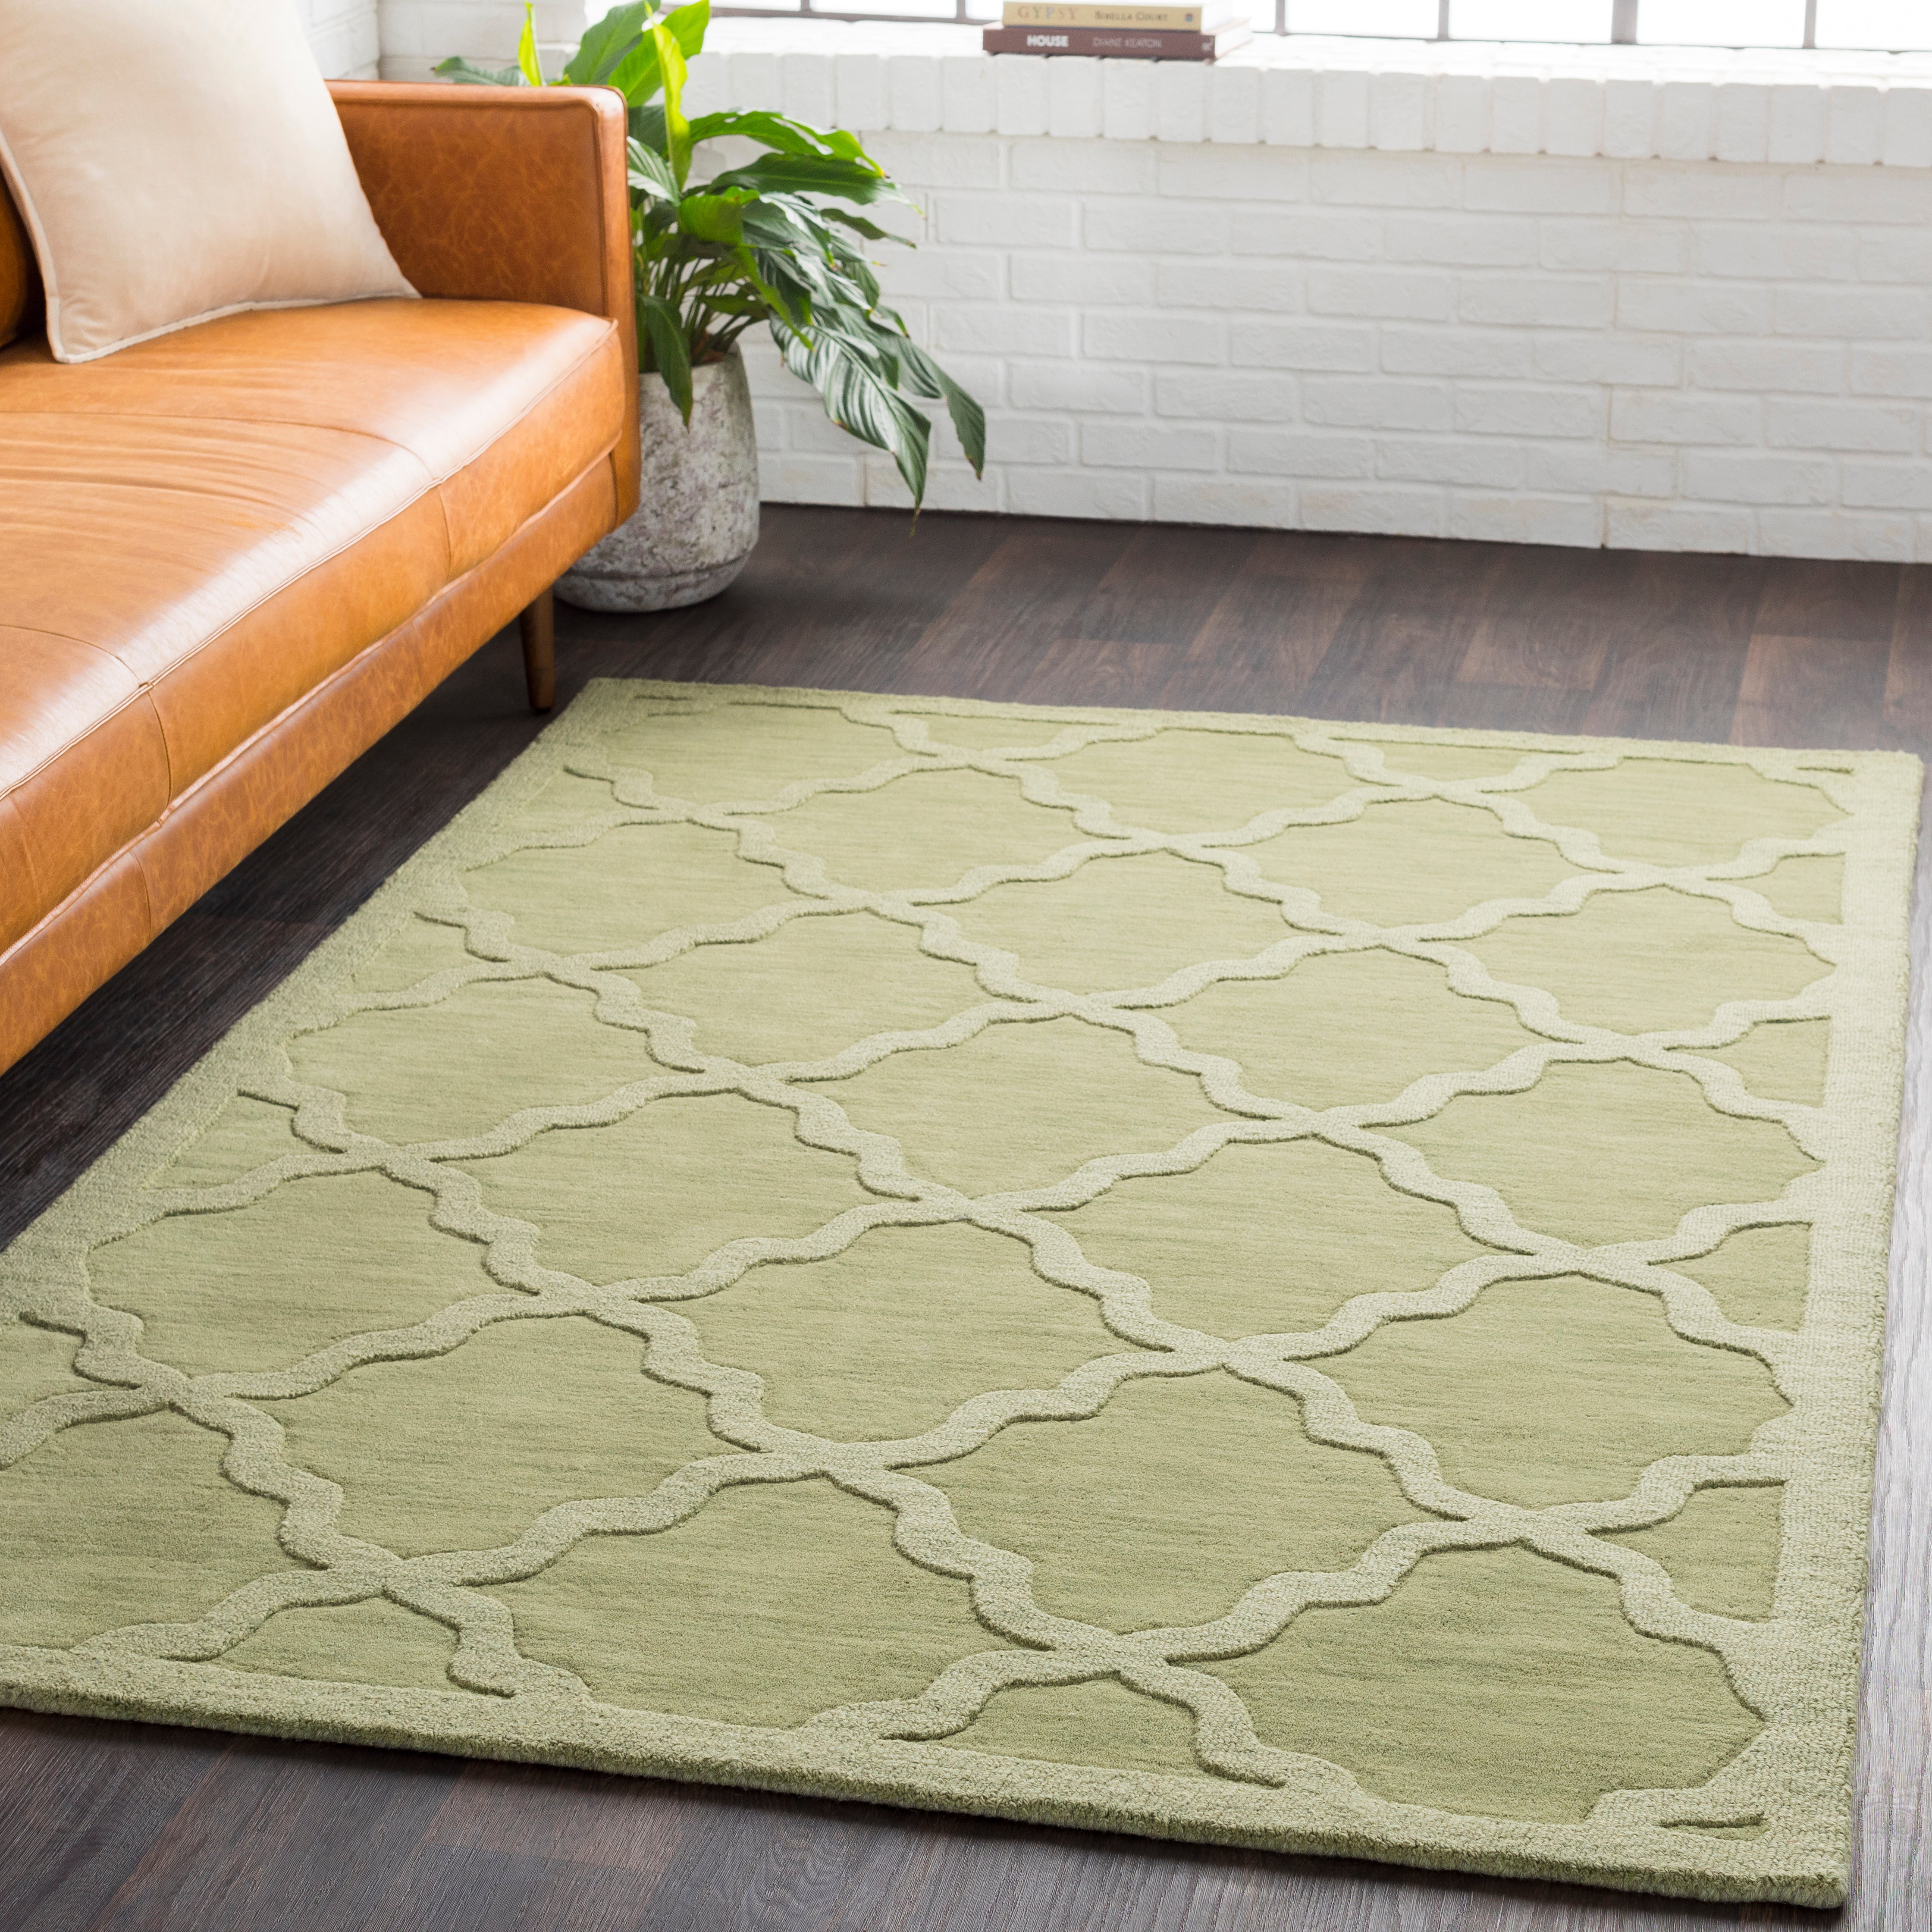 Surya Central Park Solid Green AWHP-4016 Area Rug